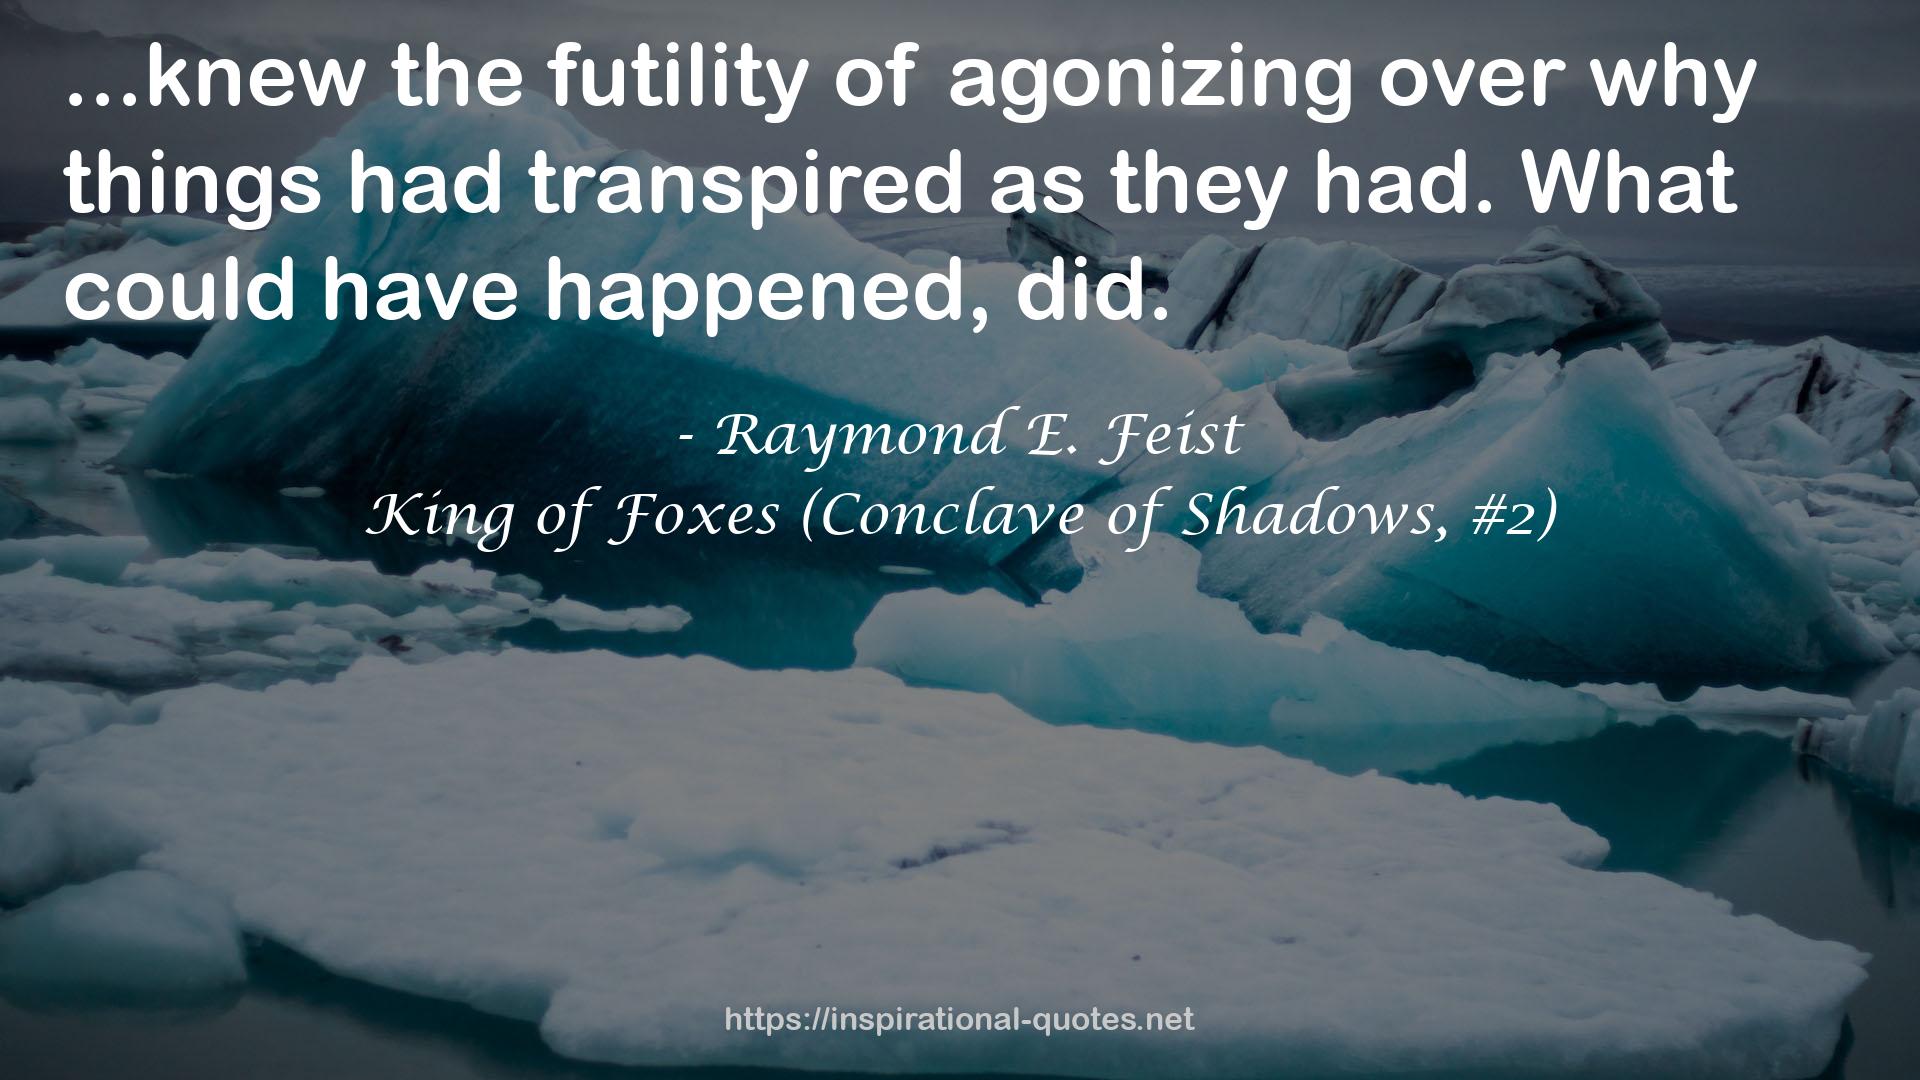 King of Foxes (Conclave of Shadows, #2) QUOTES